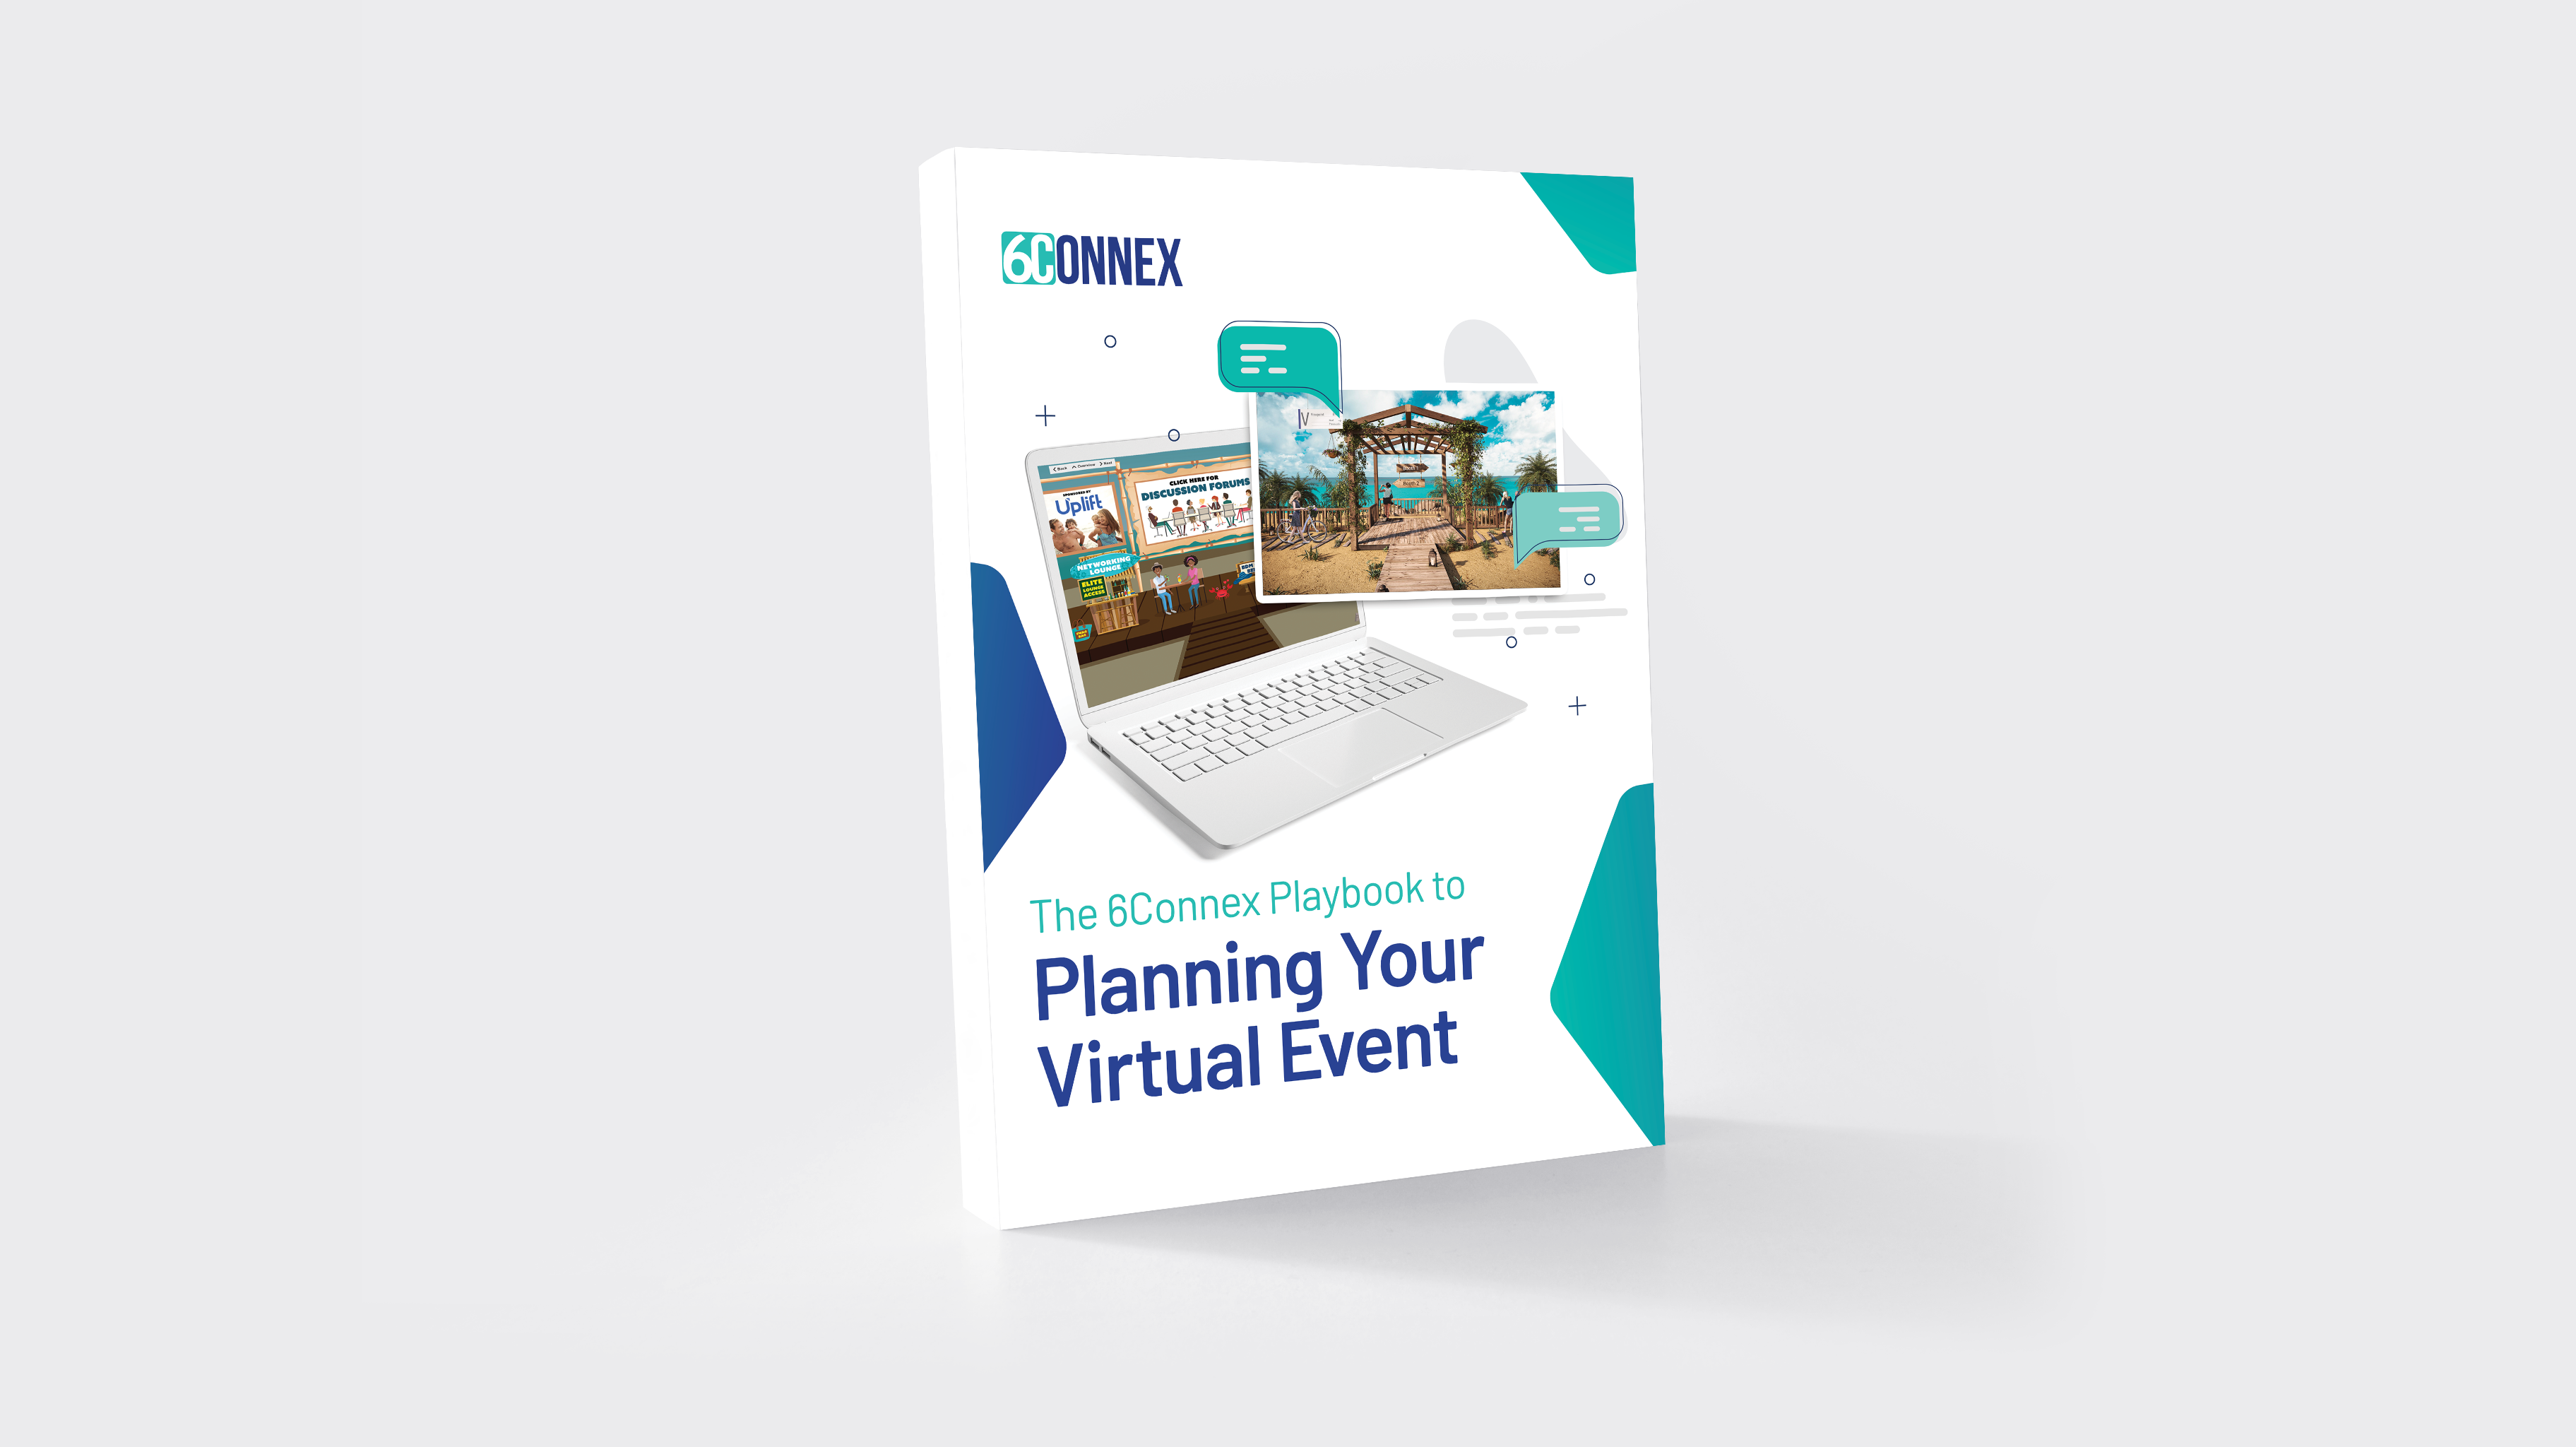 The Playbook to Planning Your Virtual Event e-book cover